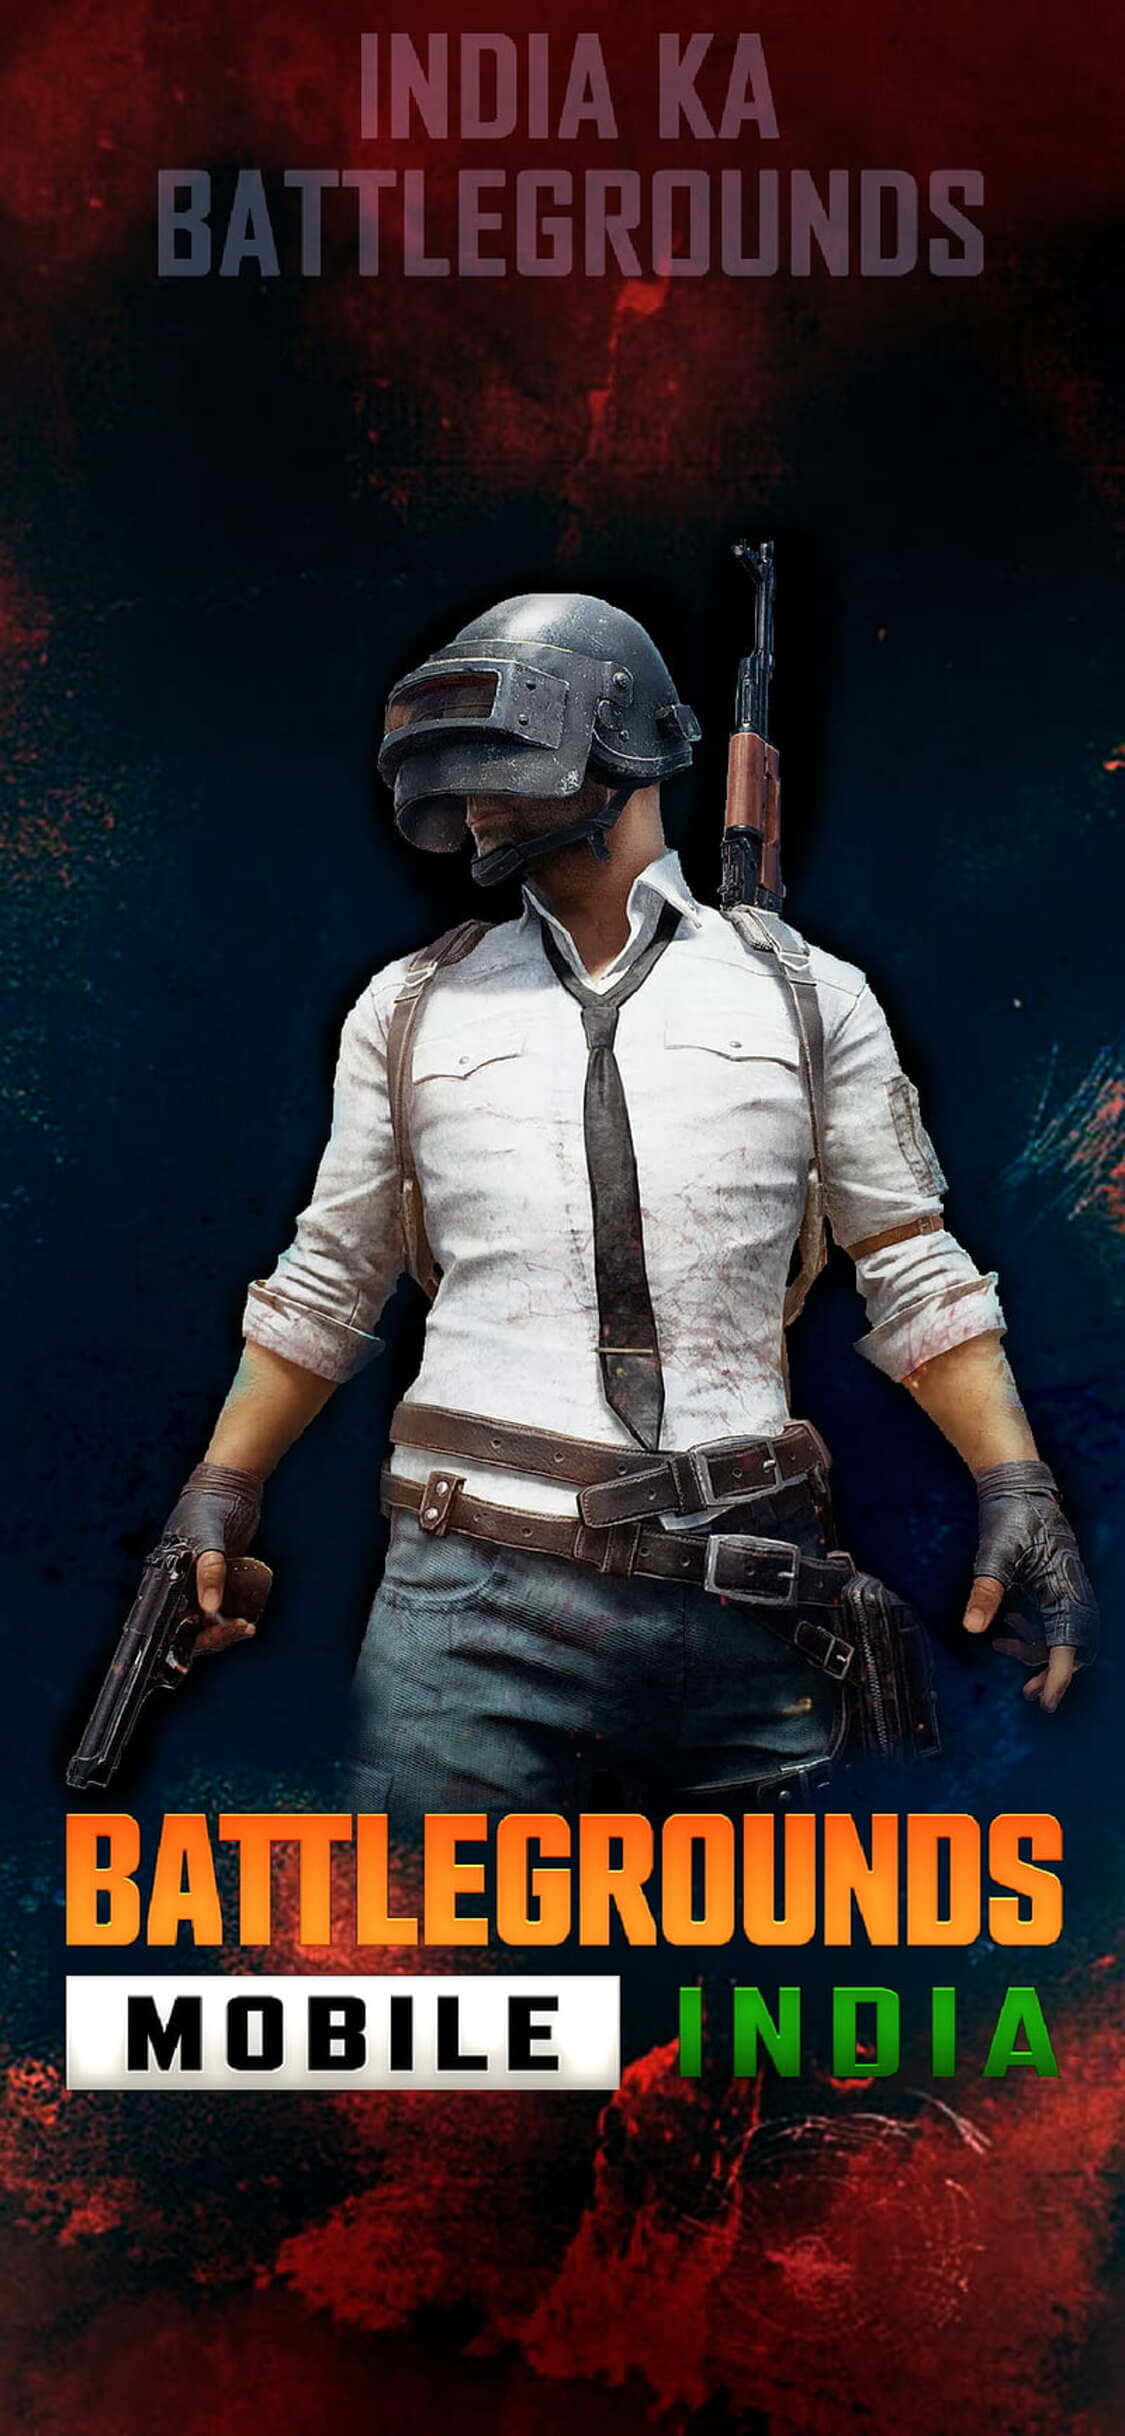 Battlegrounds Mobile India - A Poster With The Words India Ka Battlegrounds